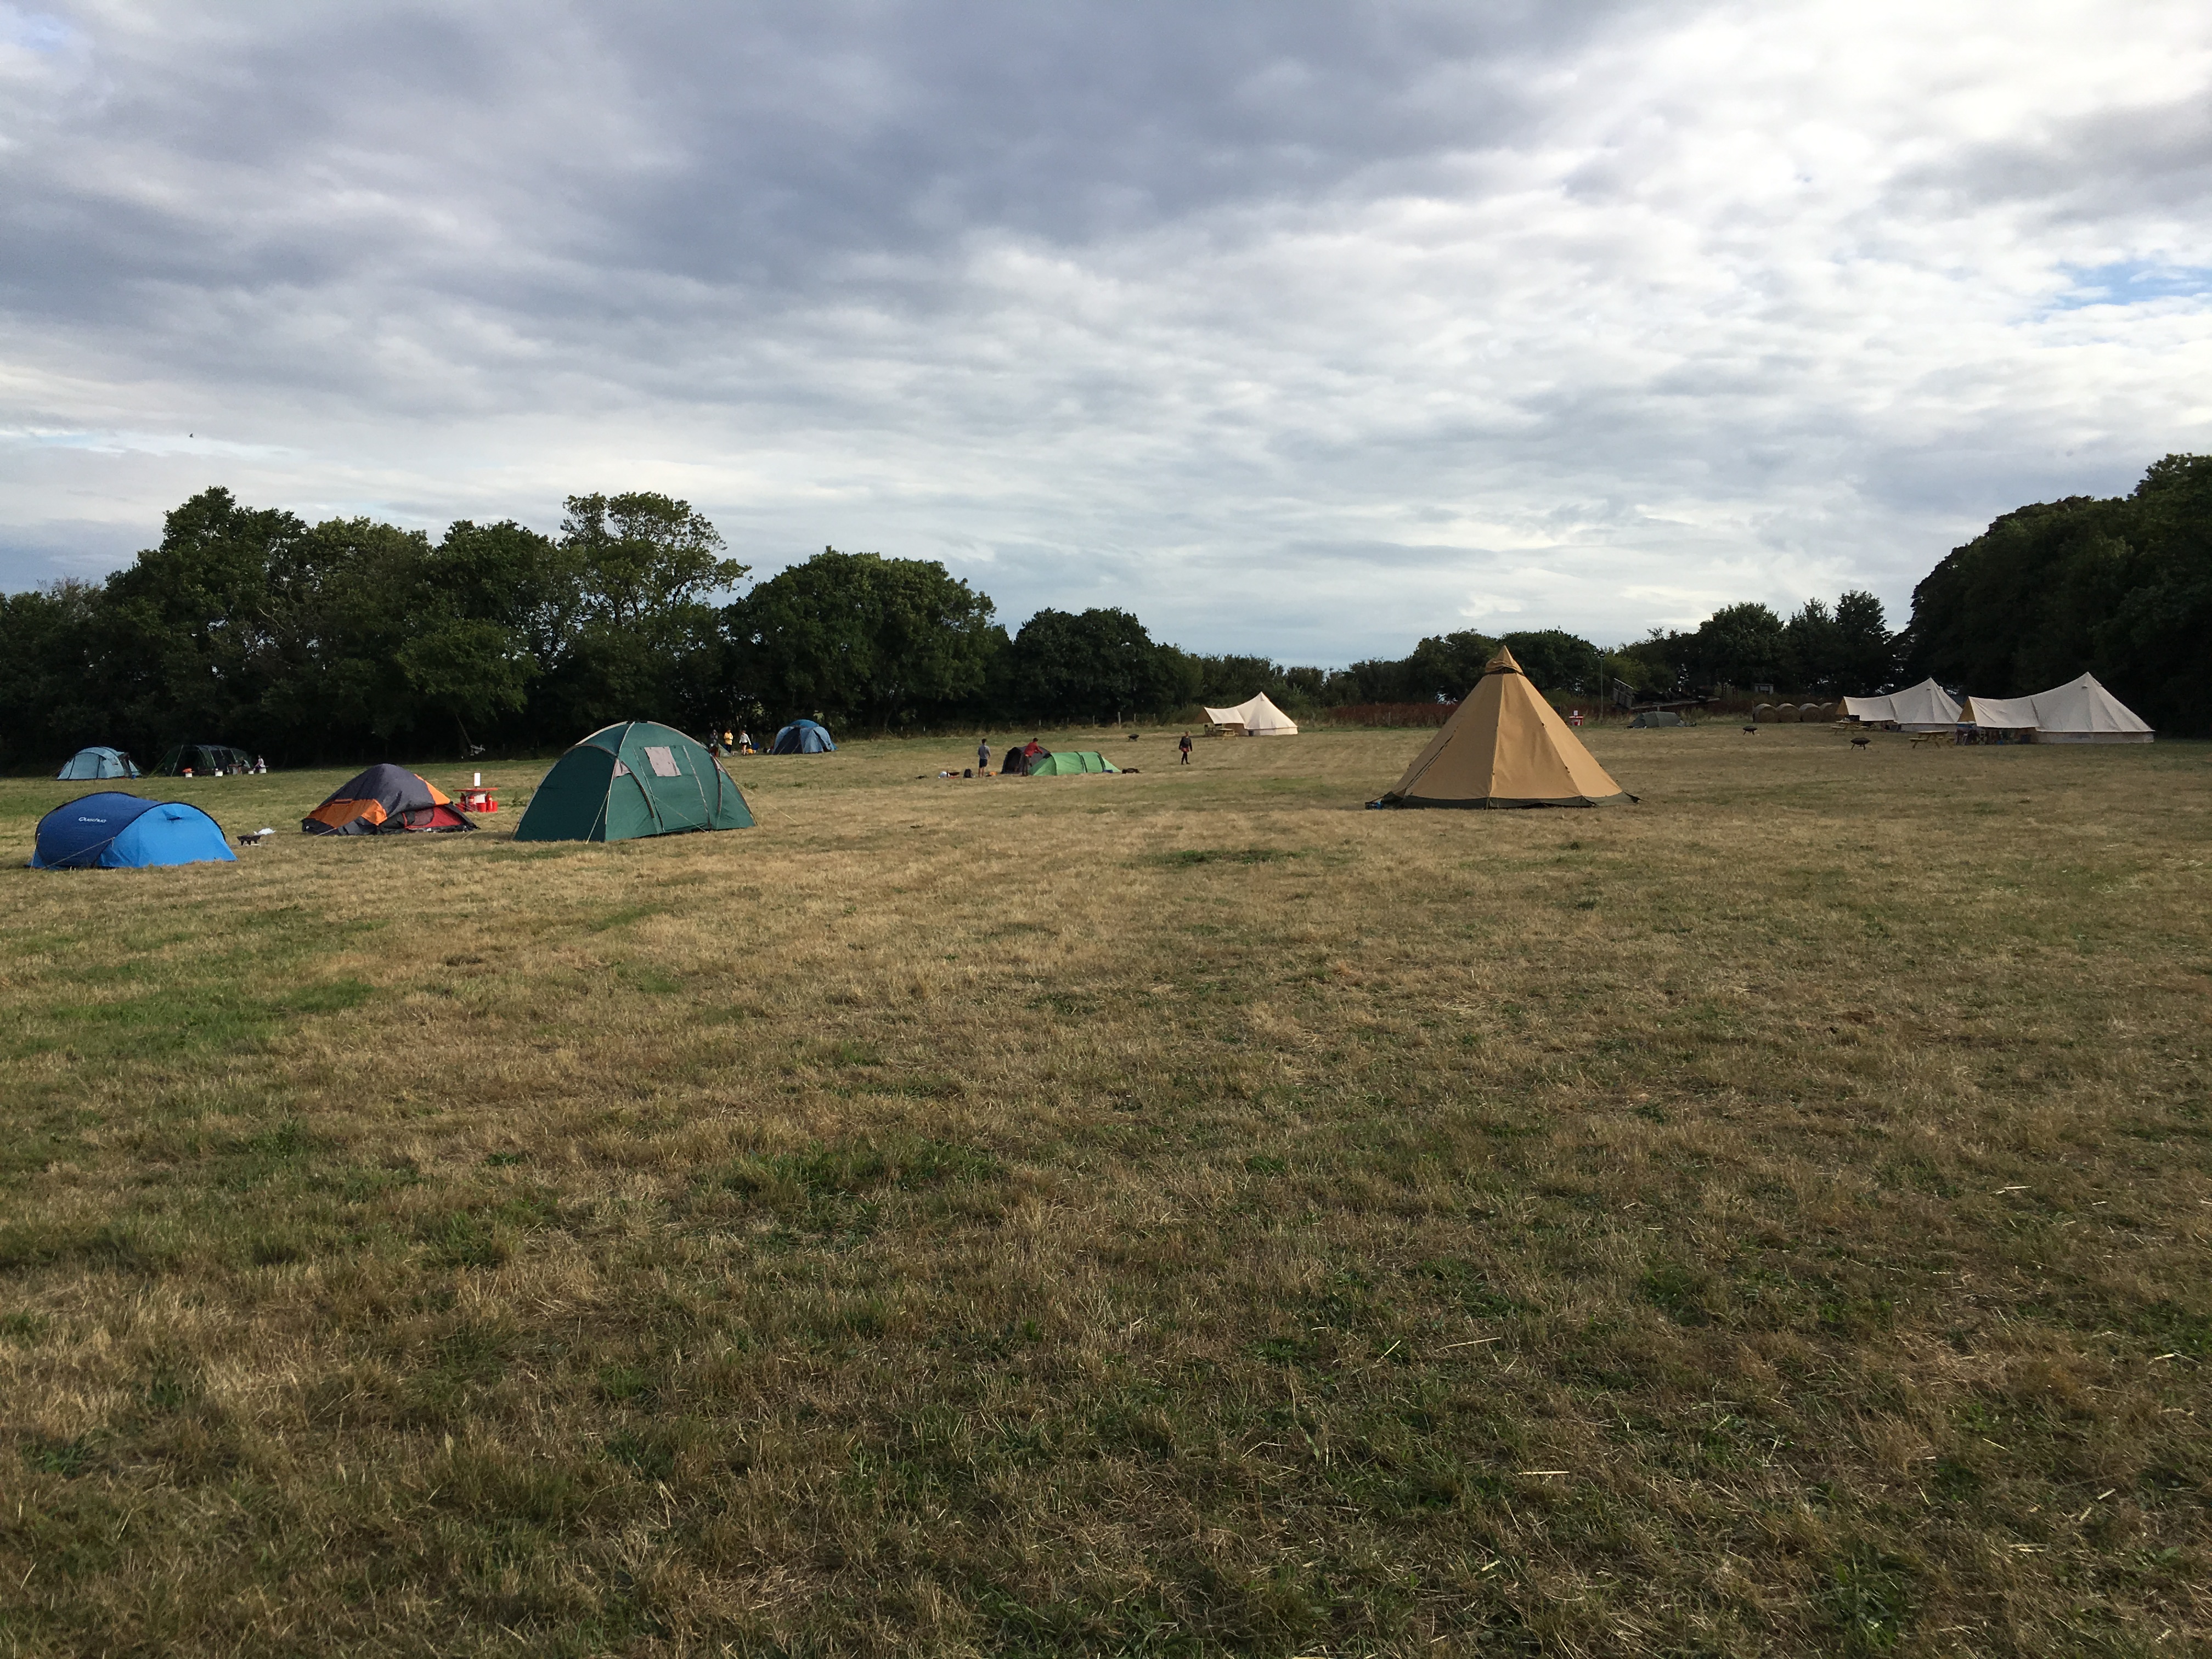 Camping near Folkestone - tents at Pete's Field campsite